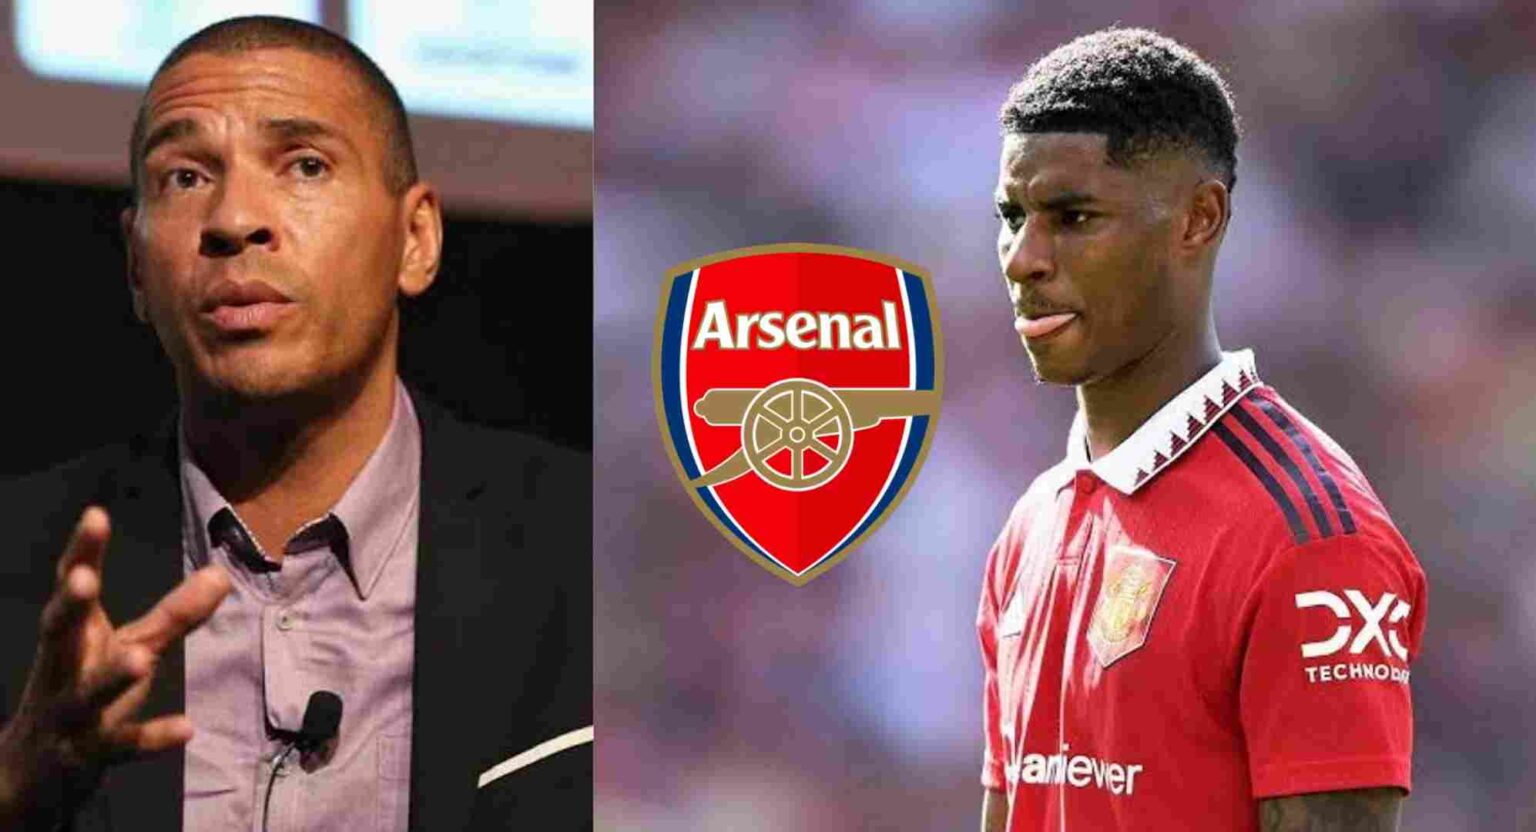 'He would be a great fit for Arsenal': Ex Liverpool Stan Collymore urges Arsenal to sign Marcus Rashford